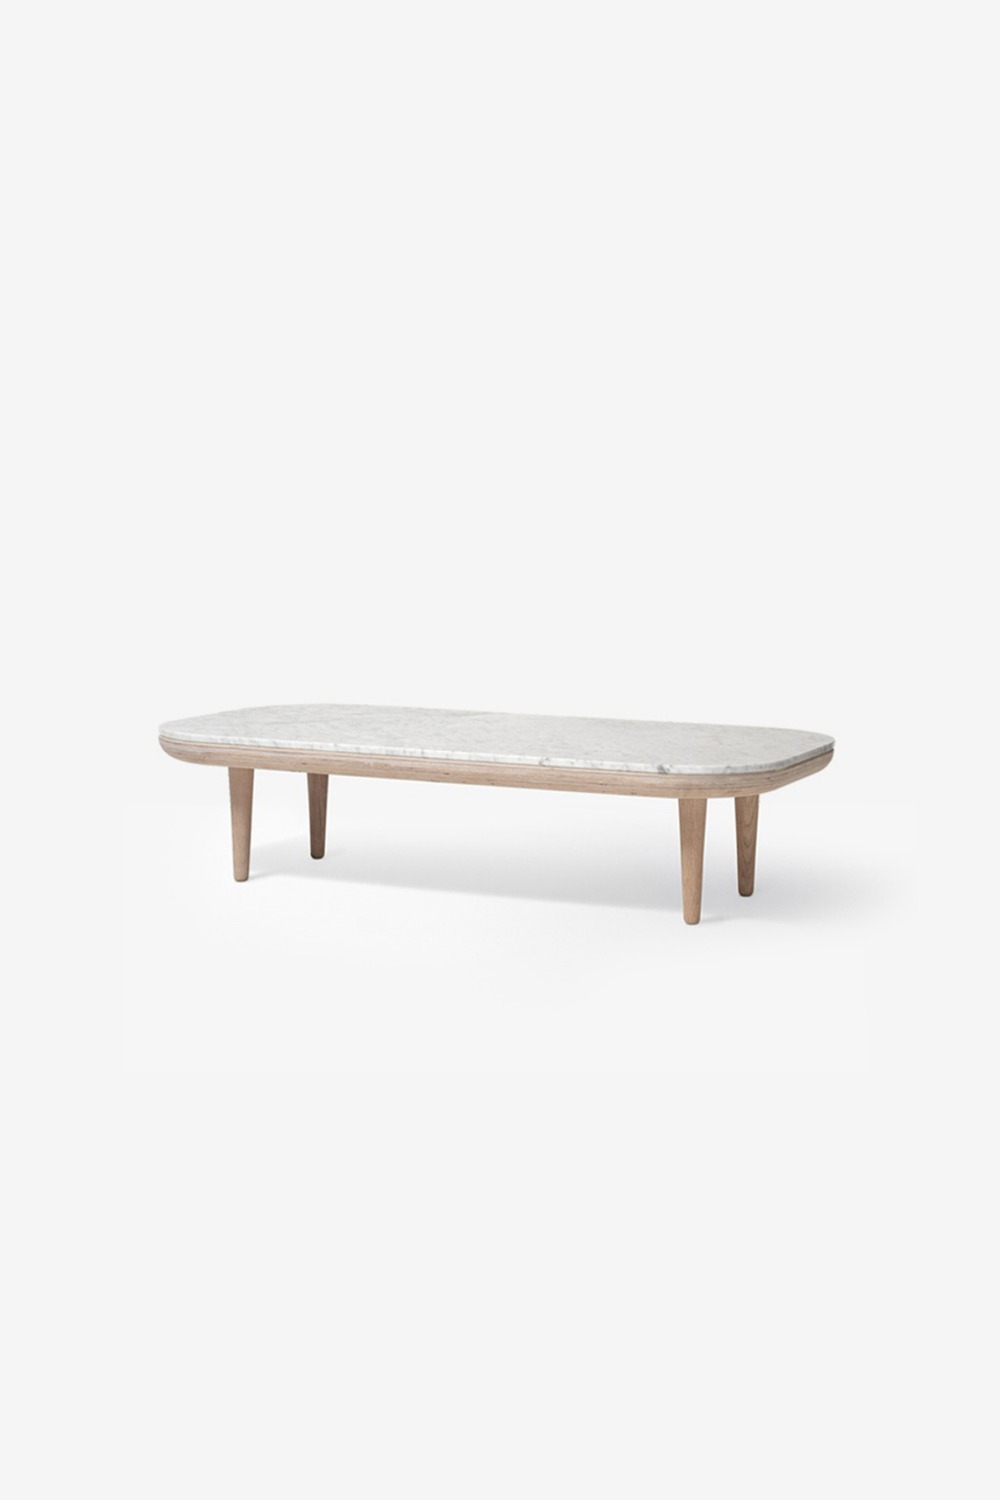 [&amp;Tradition] Fly Table / SC5 (Oiled oak)